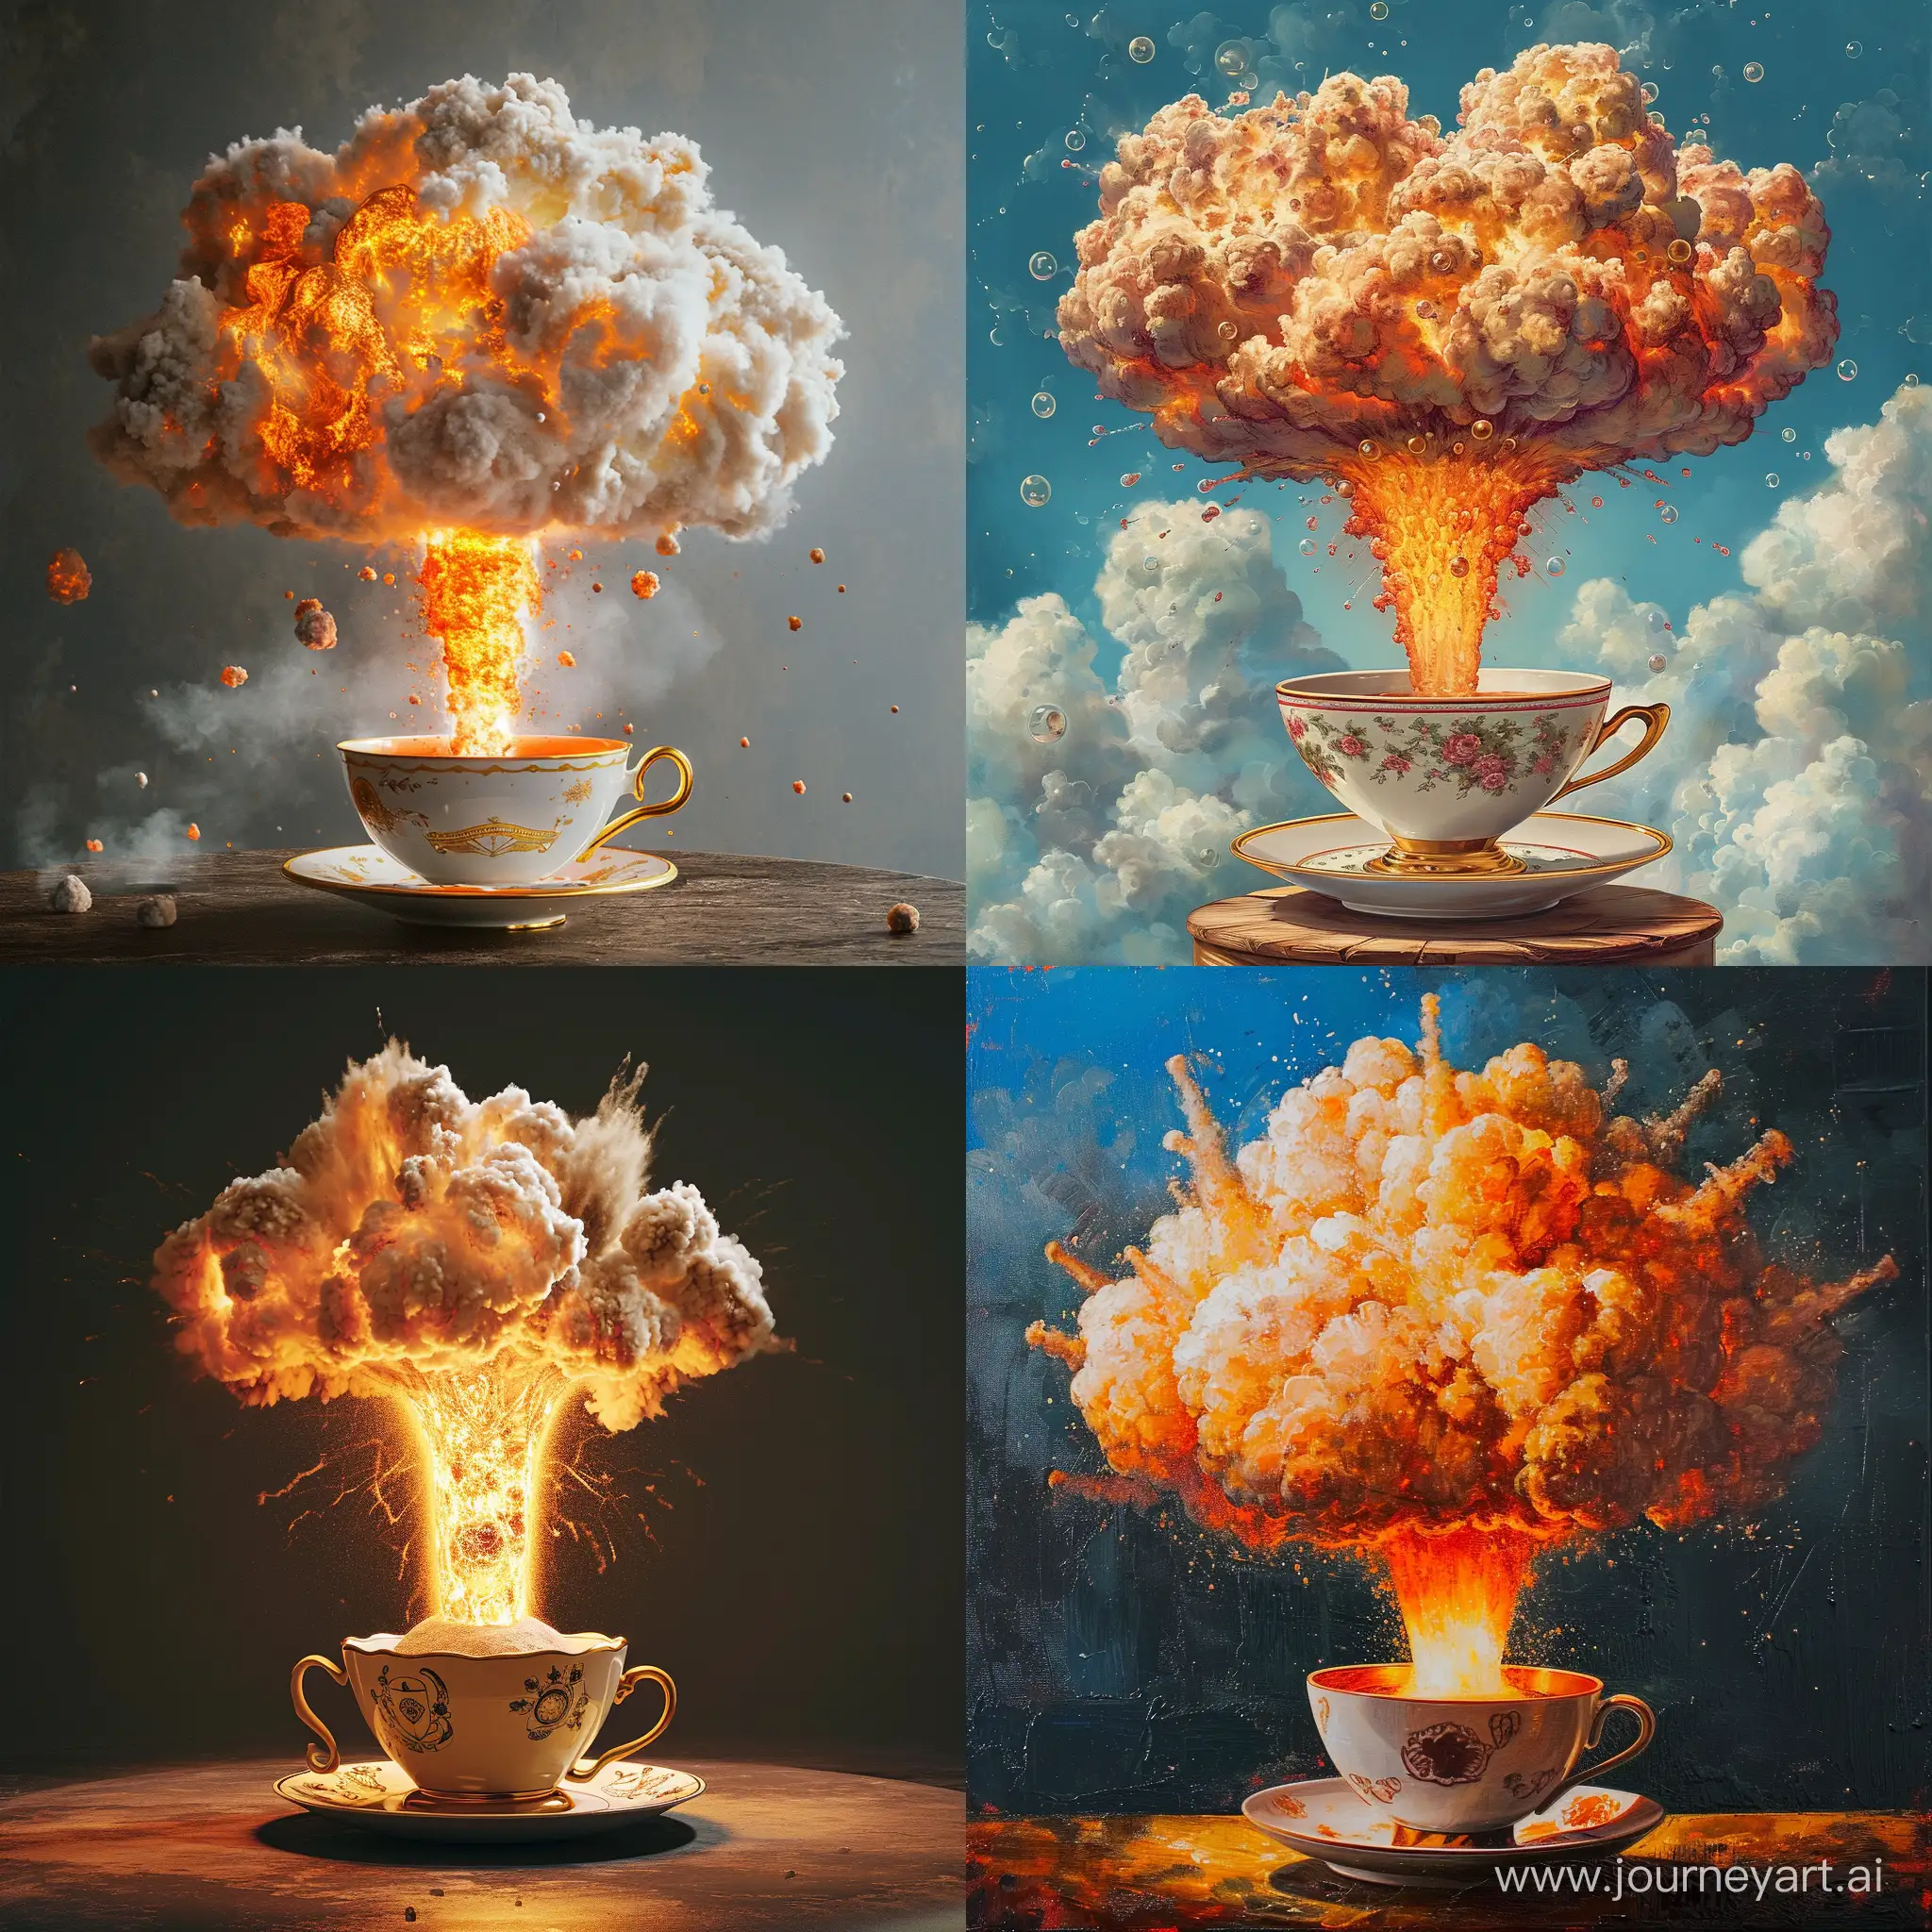 nuclear explosion in a teacup artwork